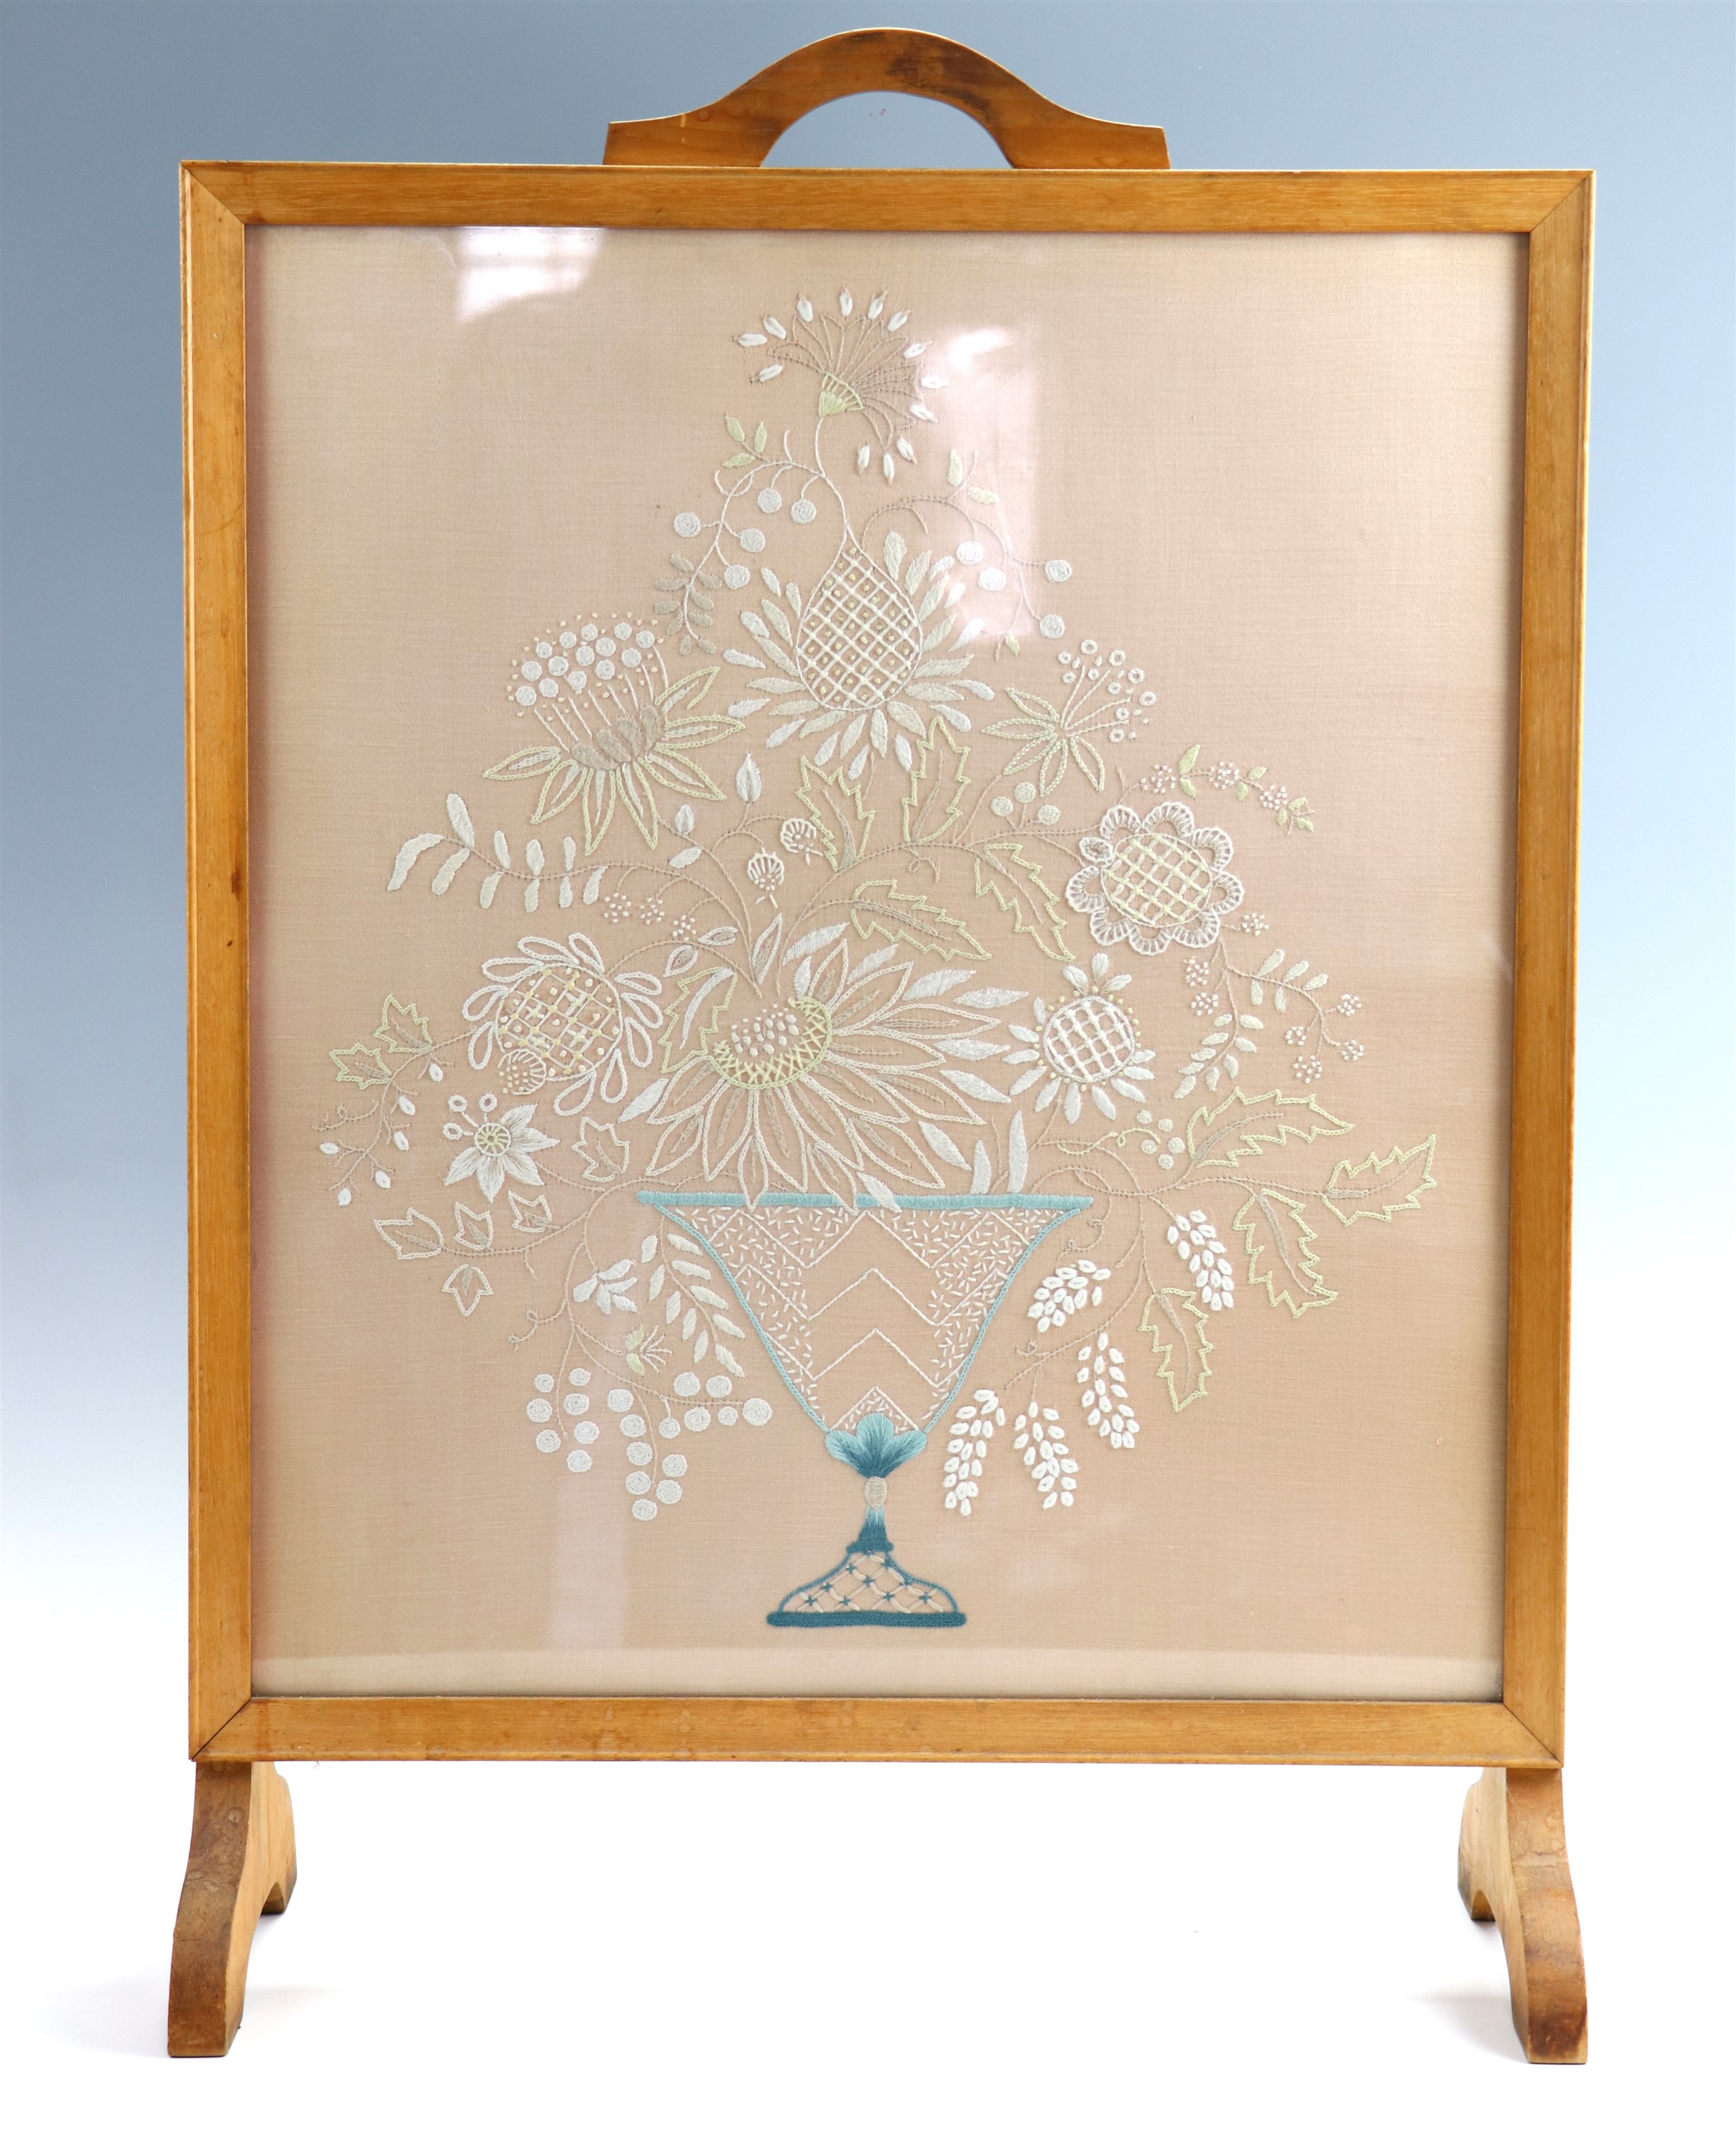 A 1950s embroidered fire screen, 50.5 x 21 x 72 cm